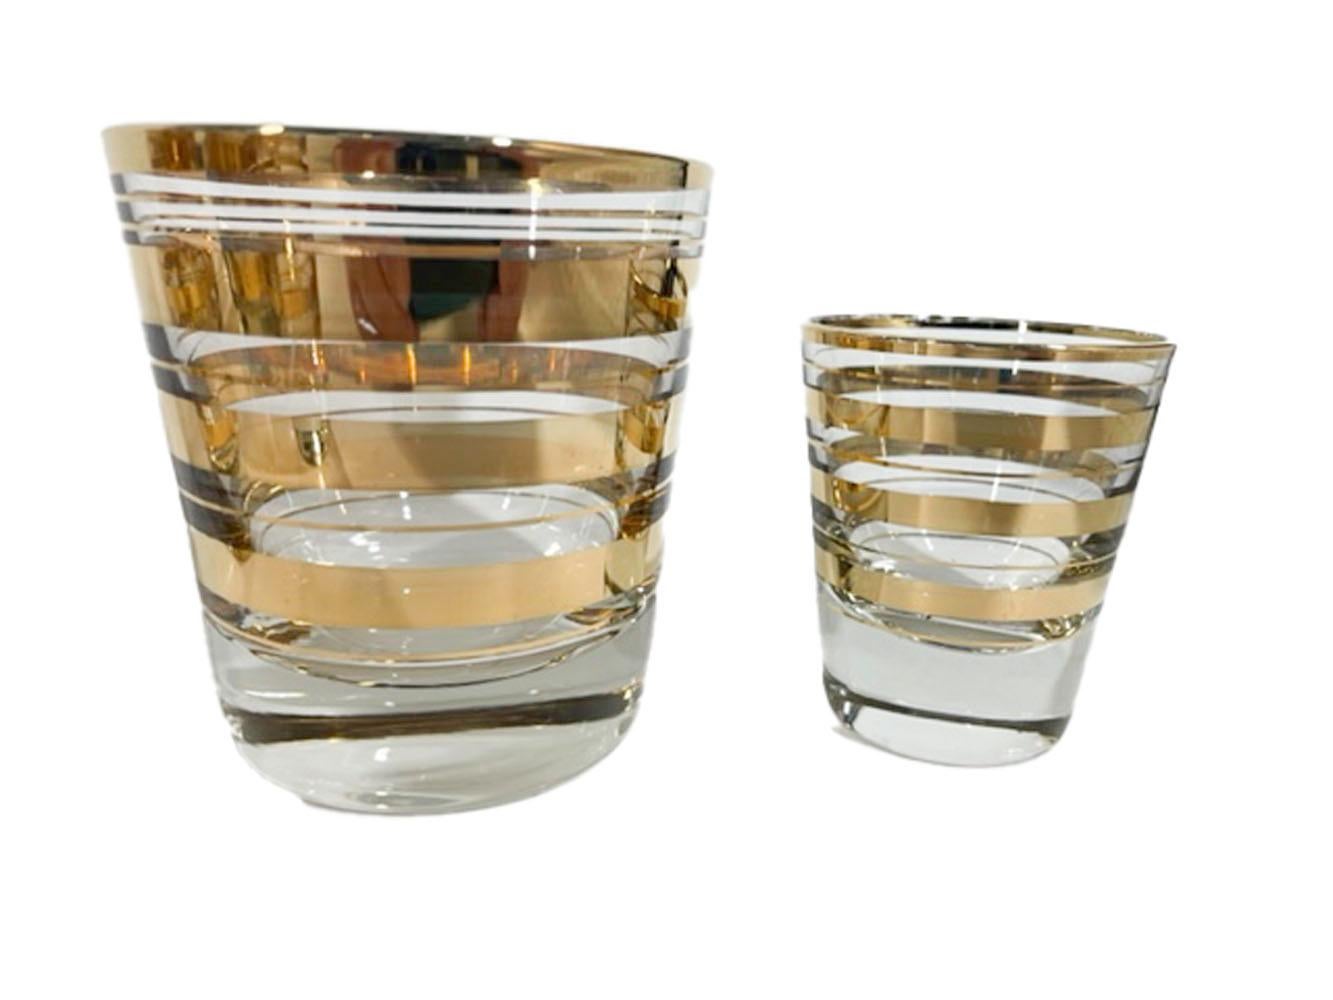 Set of 12 Art Deco cocktail glasses - 6 old fashioned glasses and 6 shot glasses all with wide 22 karat gold bands between pairs of narrow gold lines, all on clear glass.